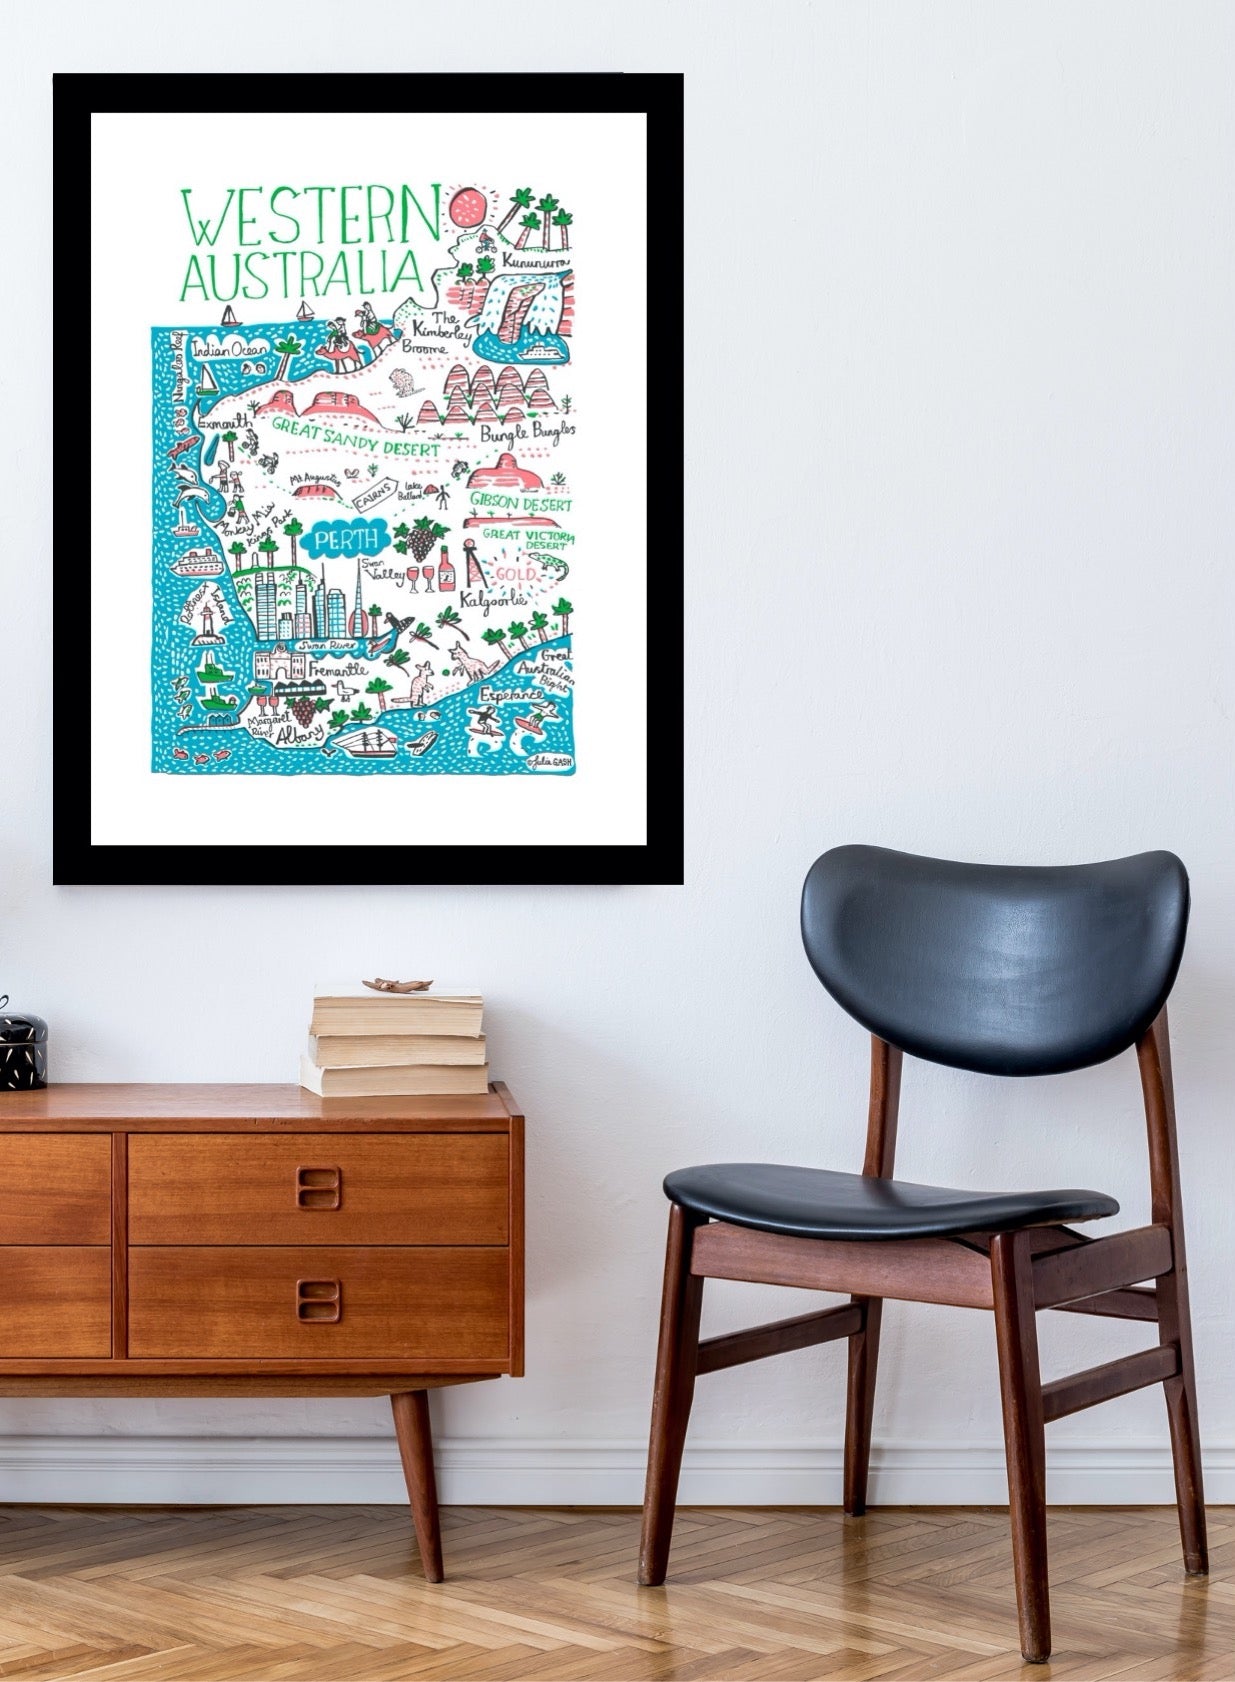 Western Australia travel art print by Julia Gash featuring Perth, Albany and Freemantle